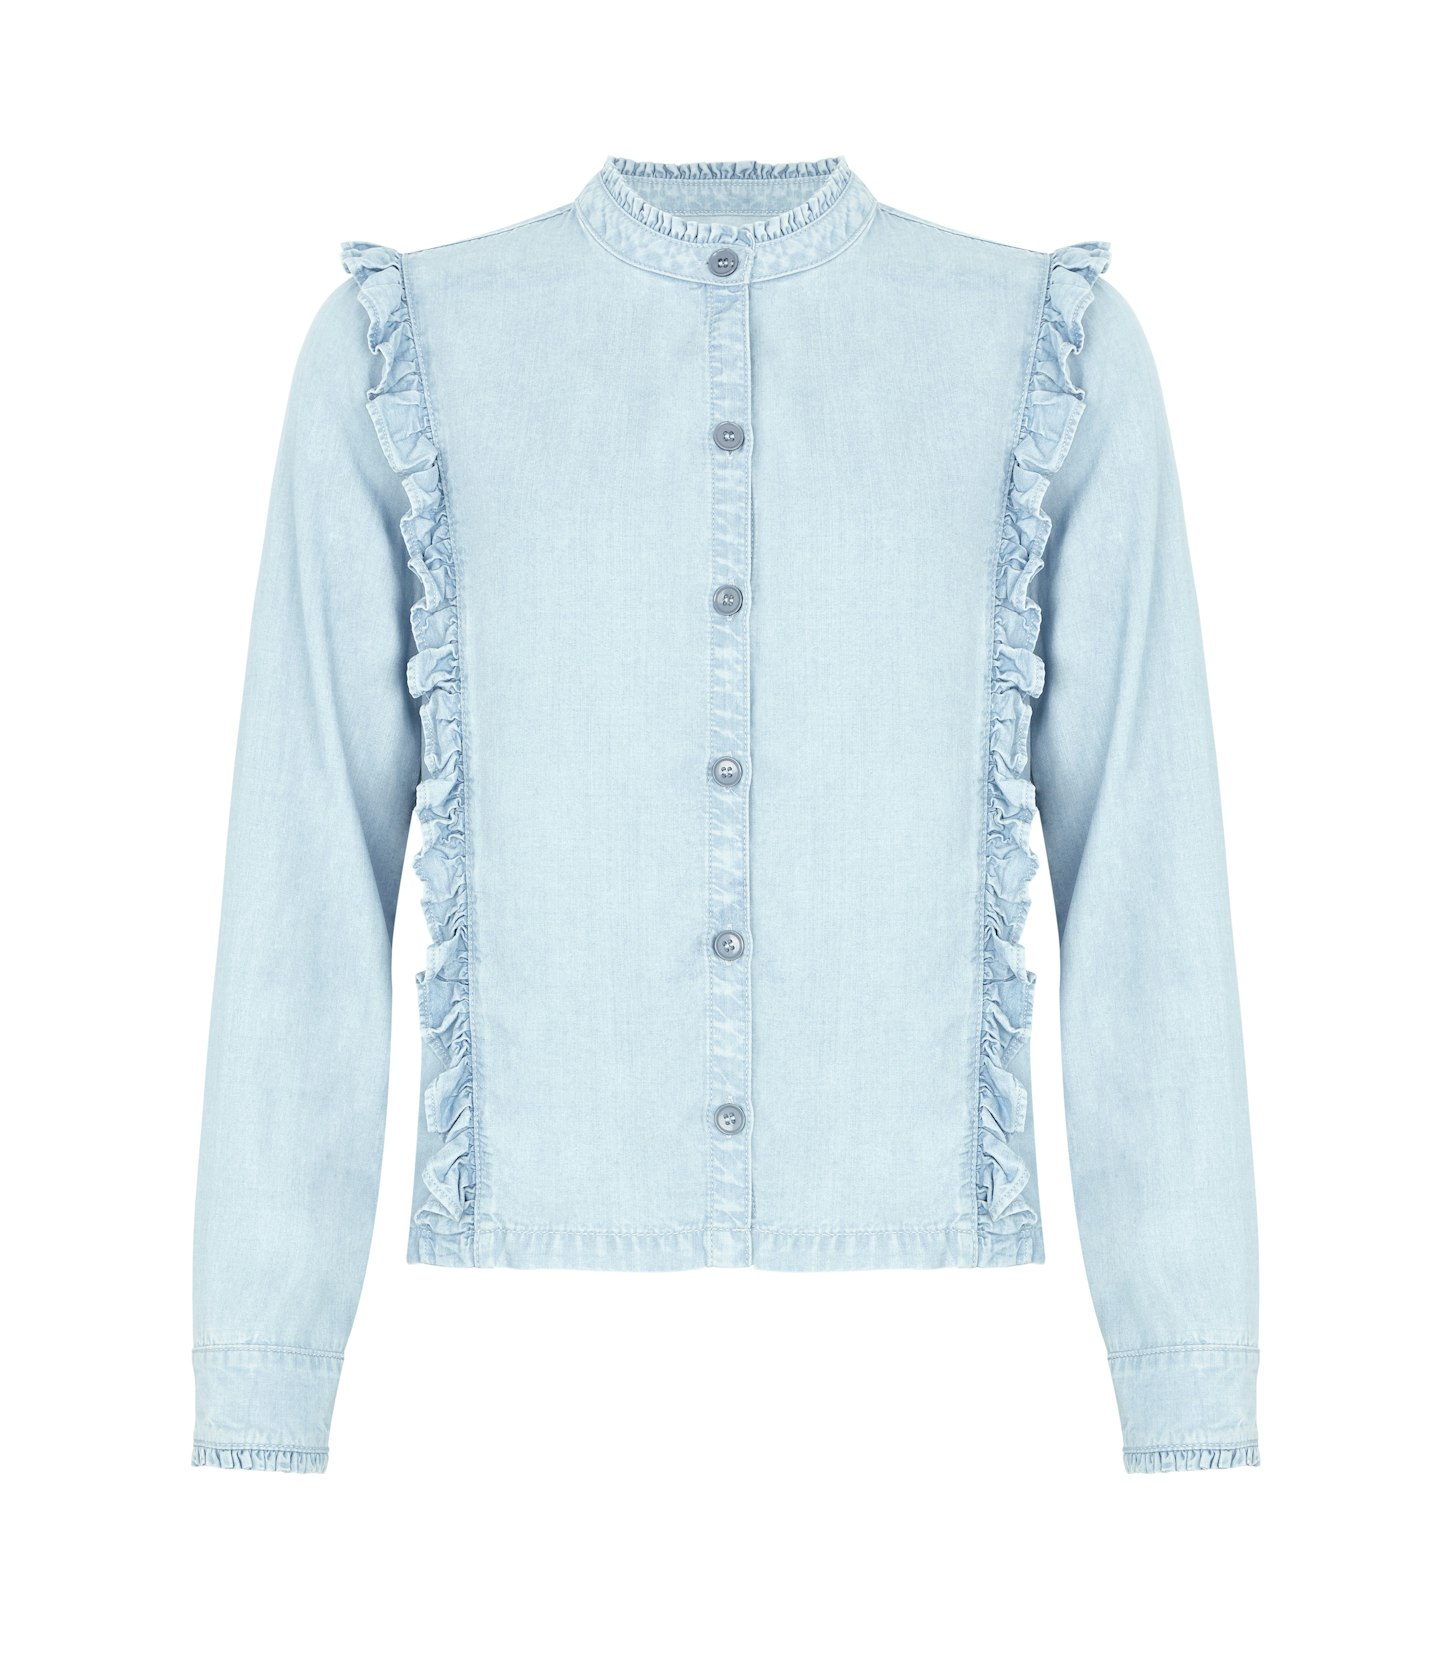 Holly Willoughby M&S denim ruffle shirt